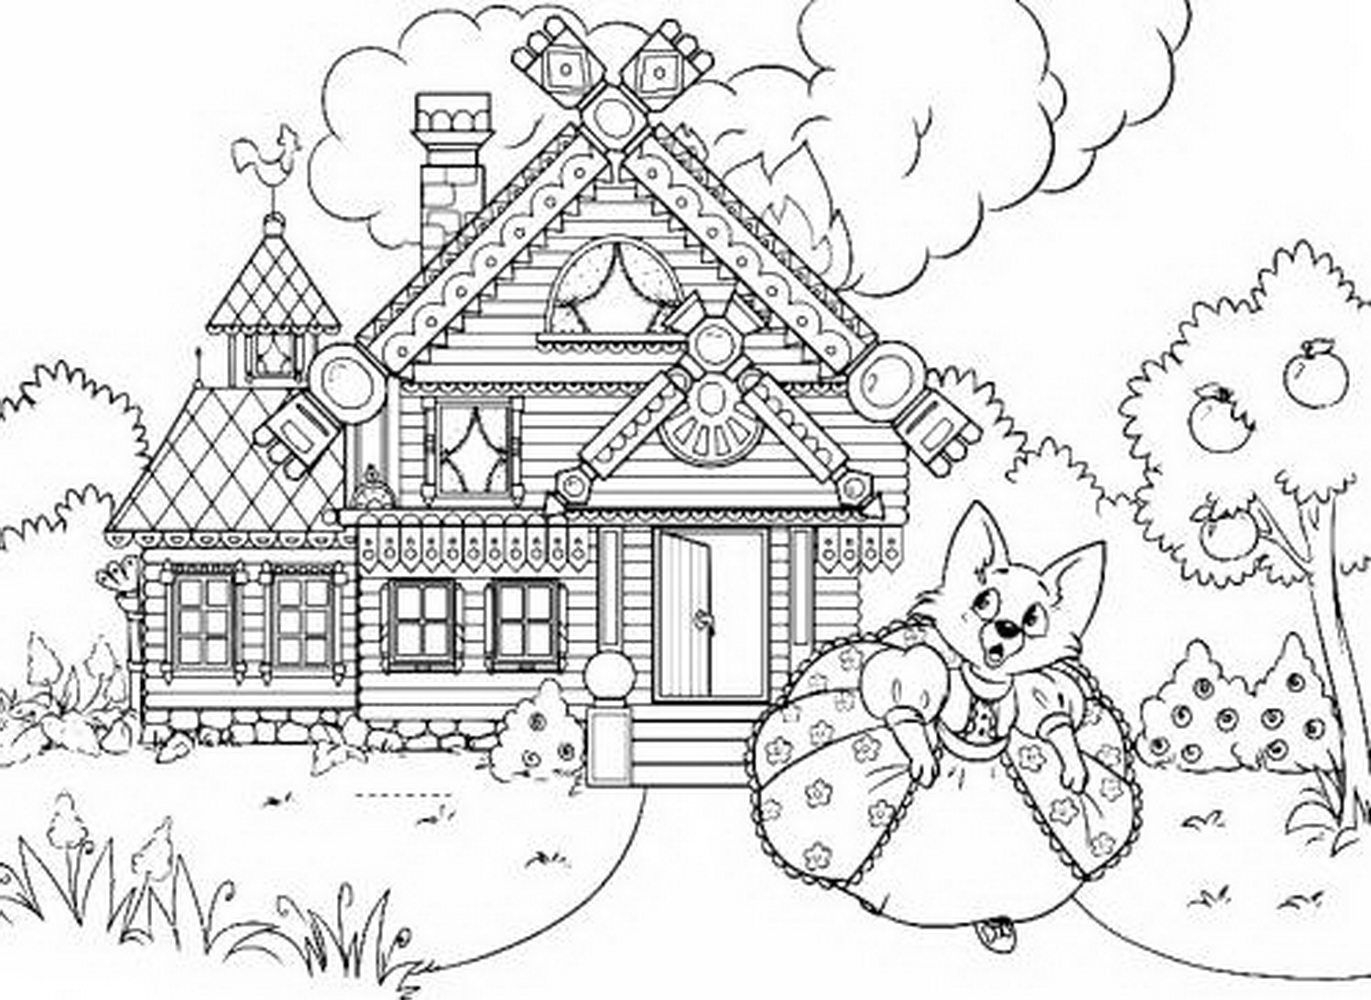 Fancy cat house coloring book for 4-5 year olds